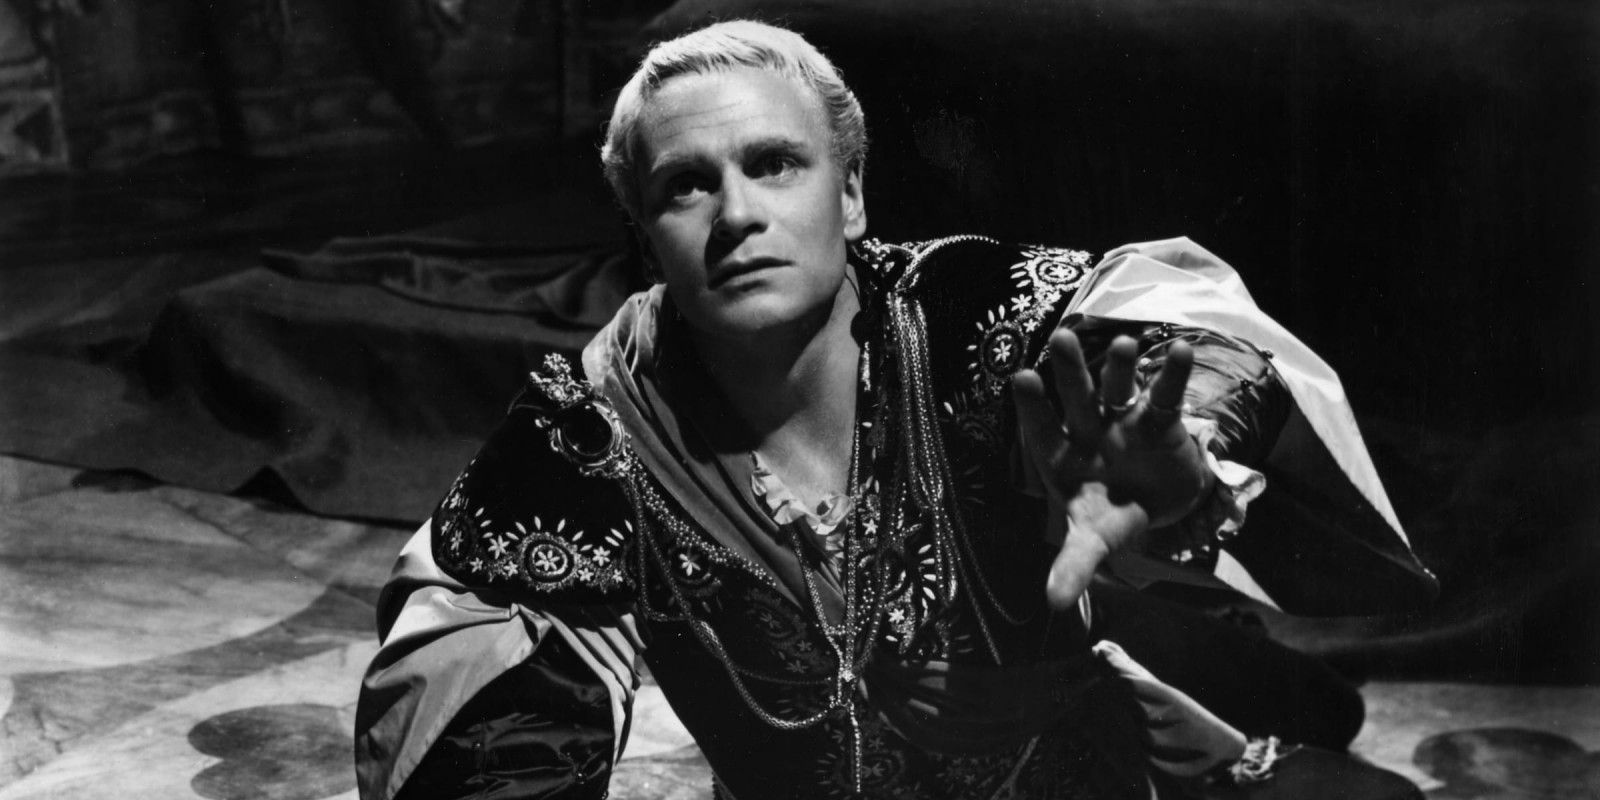 Laurence Olivier in his famed 1948 adaptation of Hamlet.